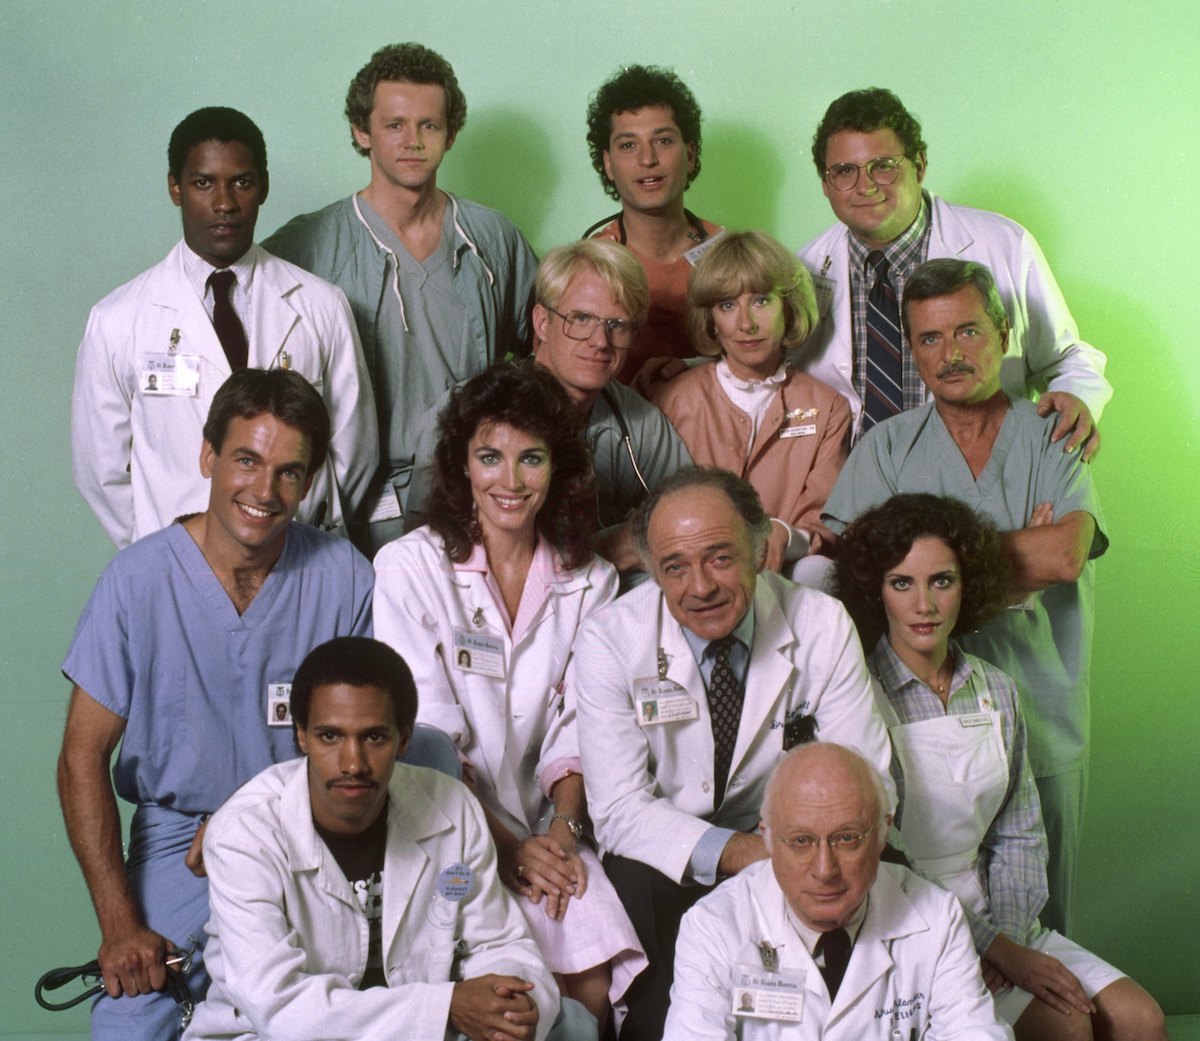 ‘St. Elsewhere’: Which Cast Members of the ’80s Medical Drama Are Still Alive?